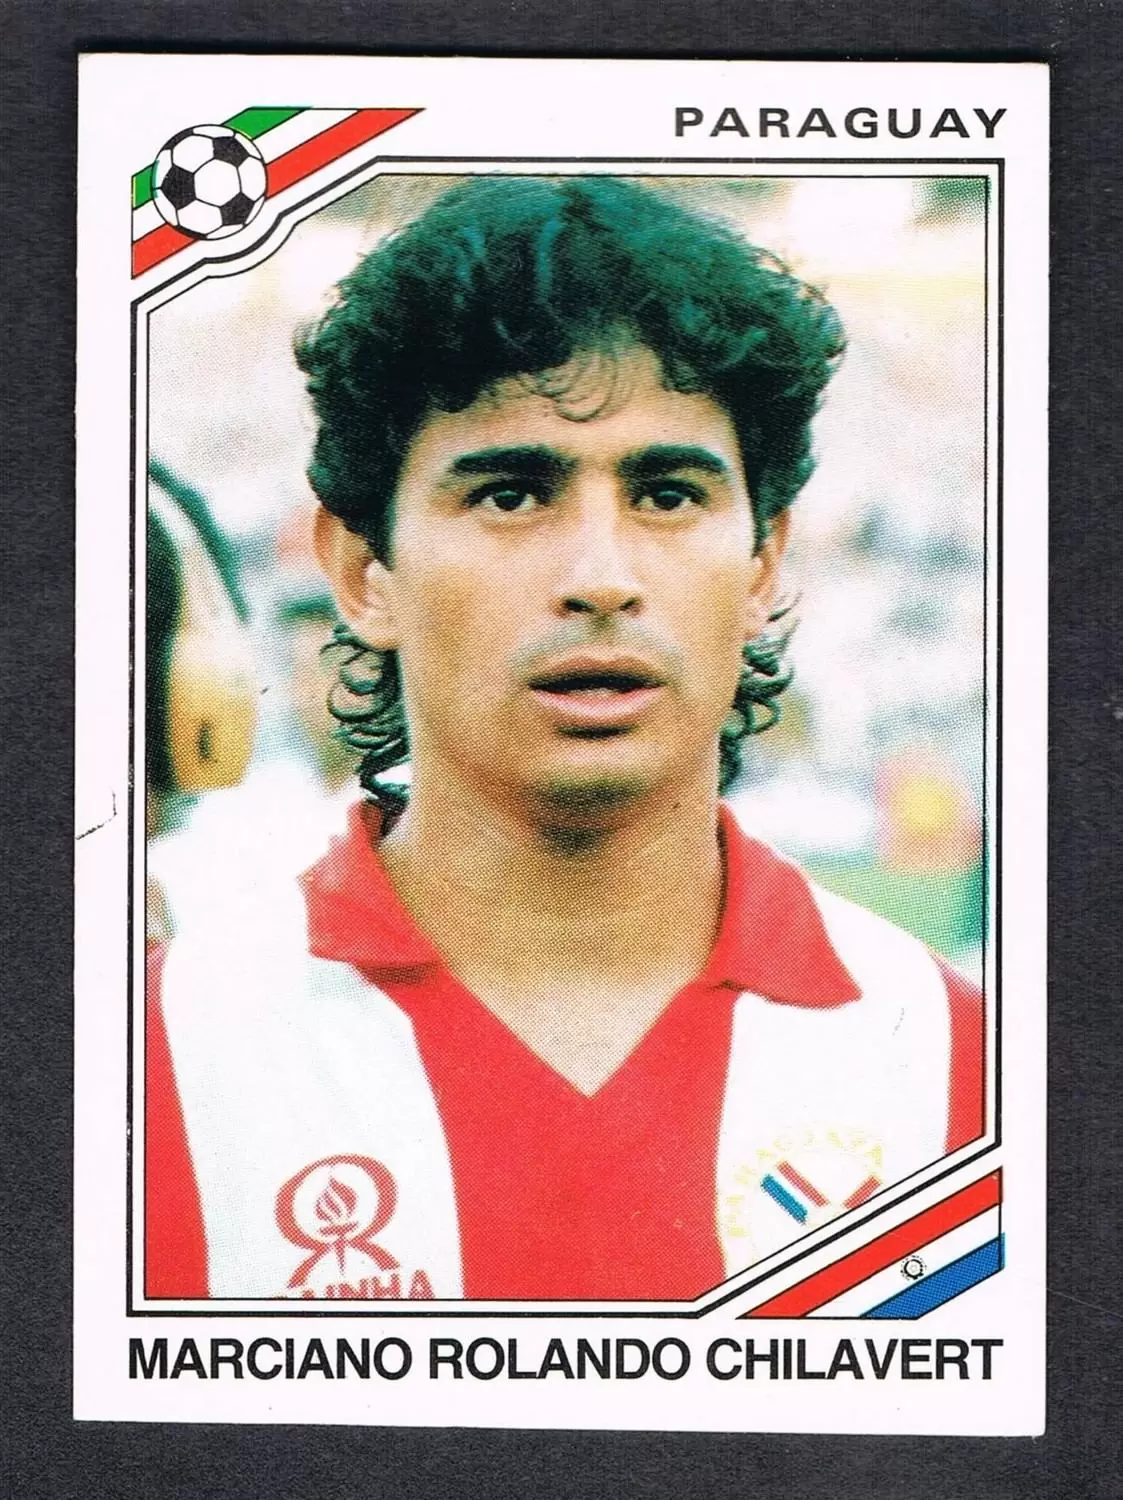 Mexico 86 World Cup - Marciano Chilavert  - Paraguay